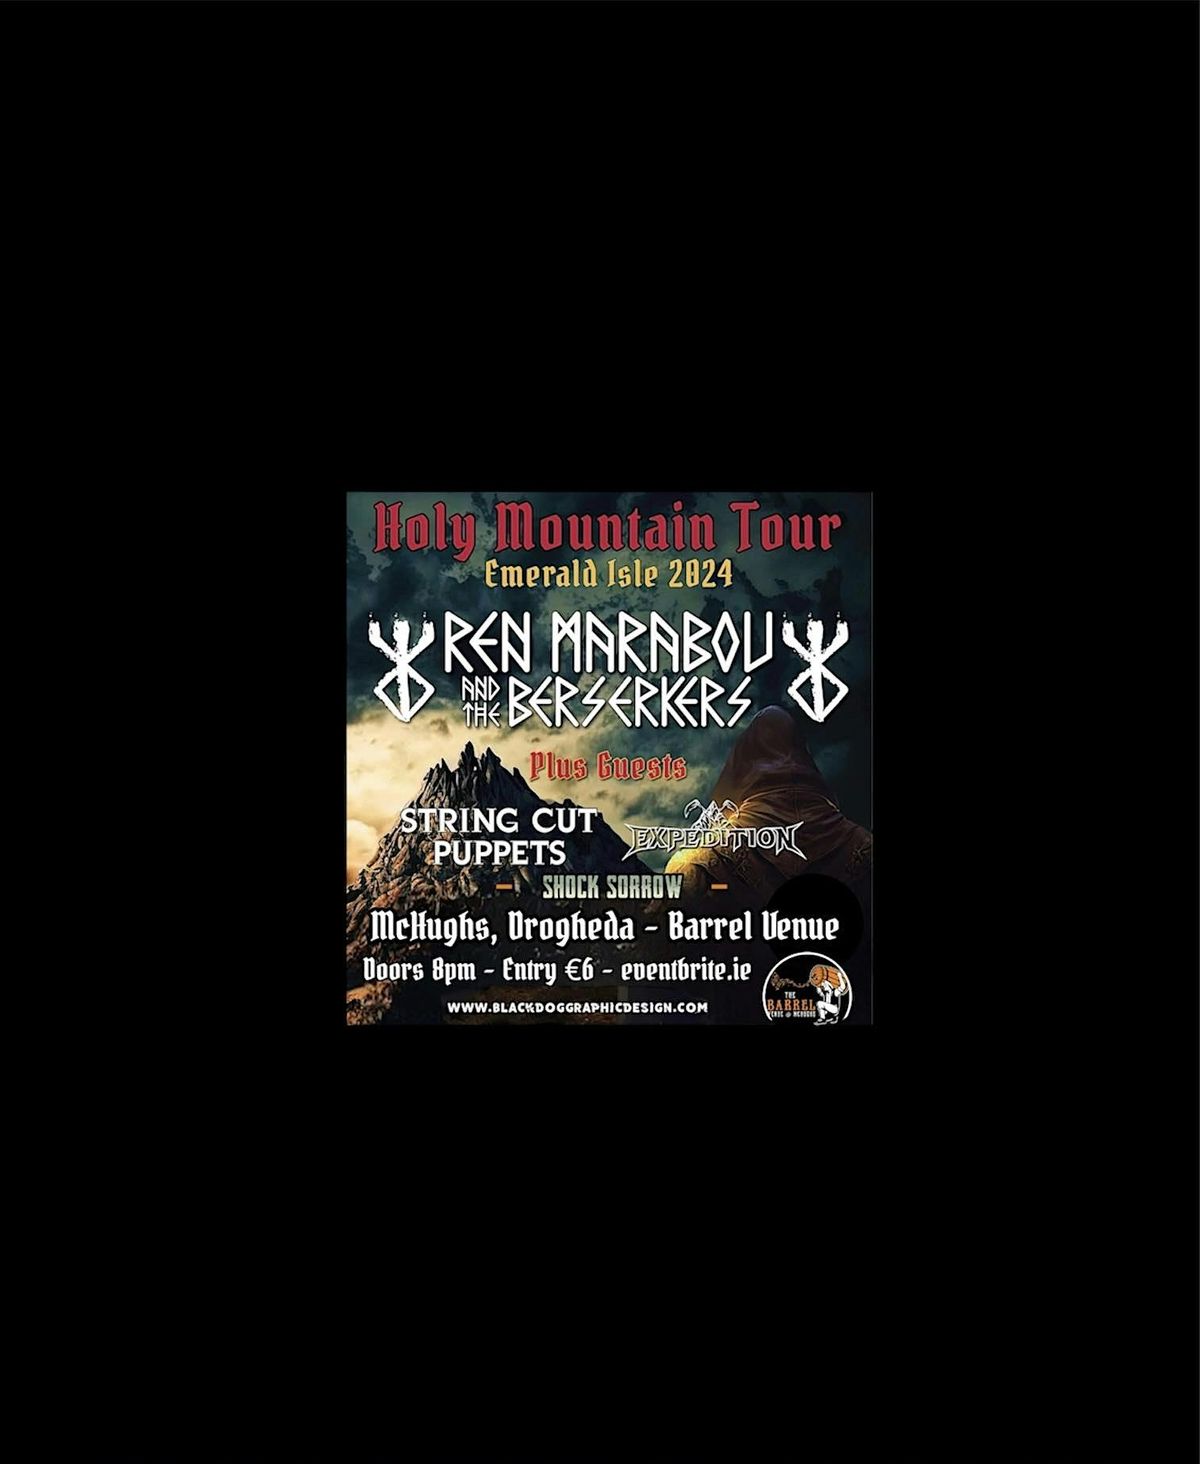 Ren Marabou and the Berserkers 'Holy Mountain Tour 2024' - Drogheda Show